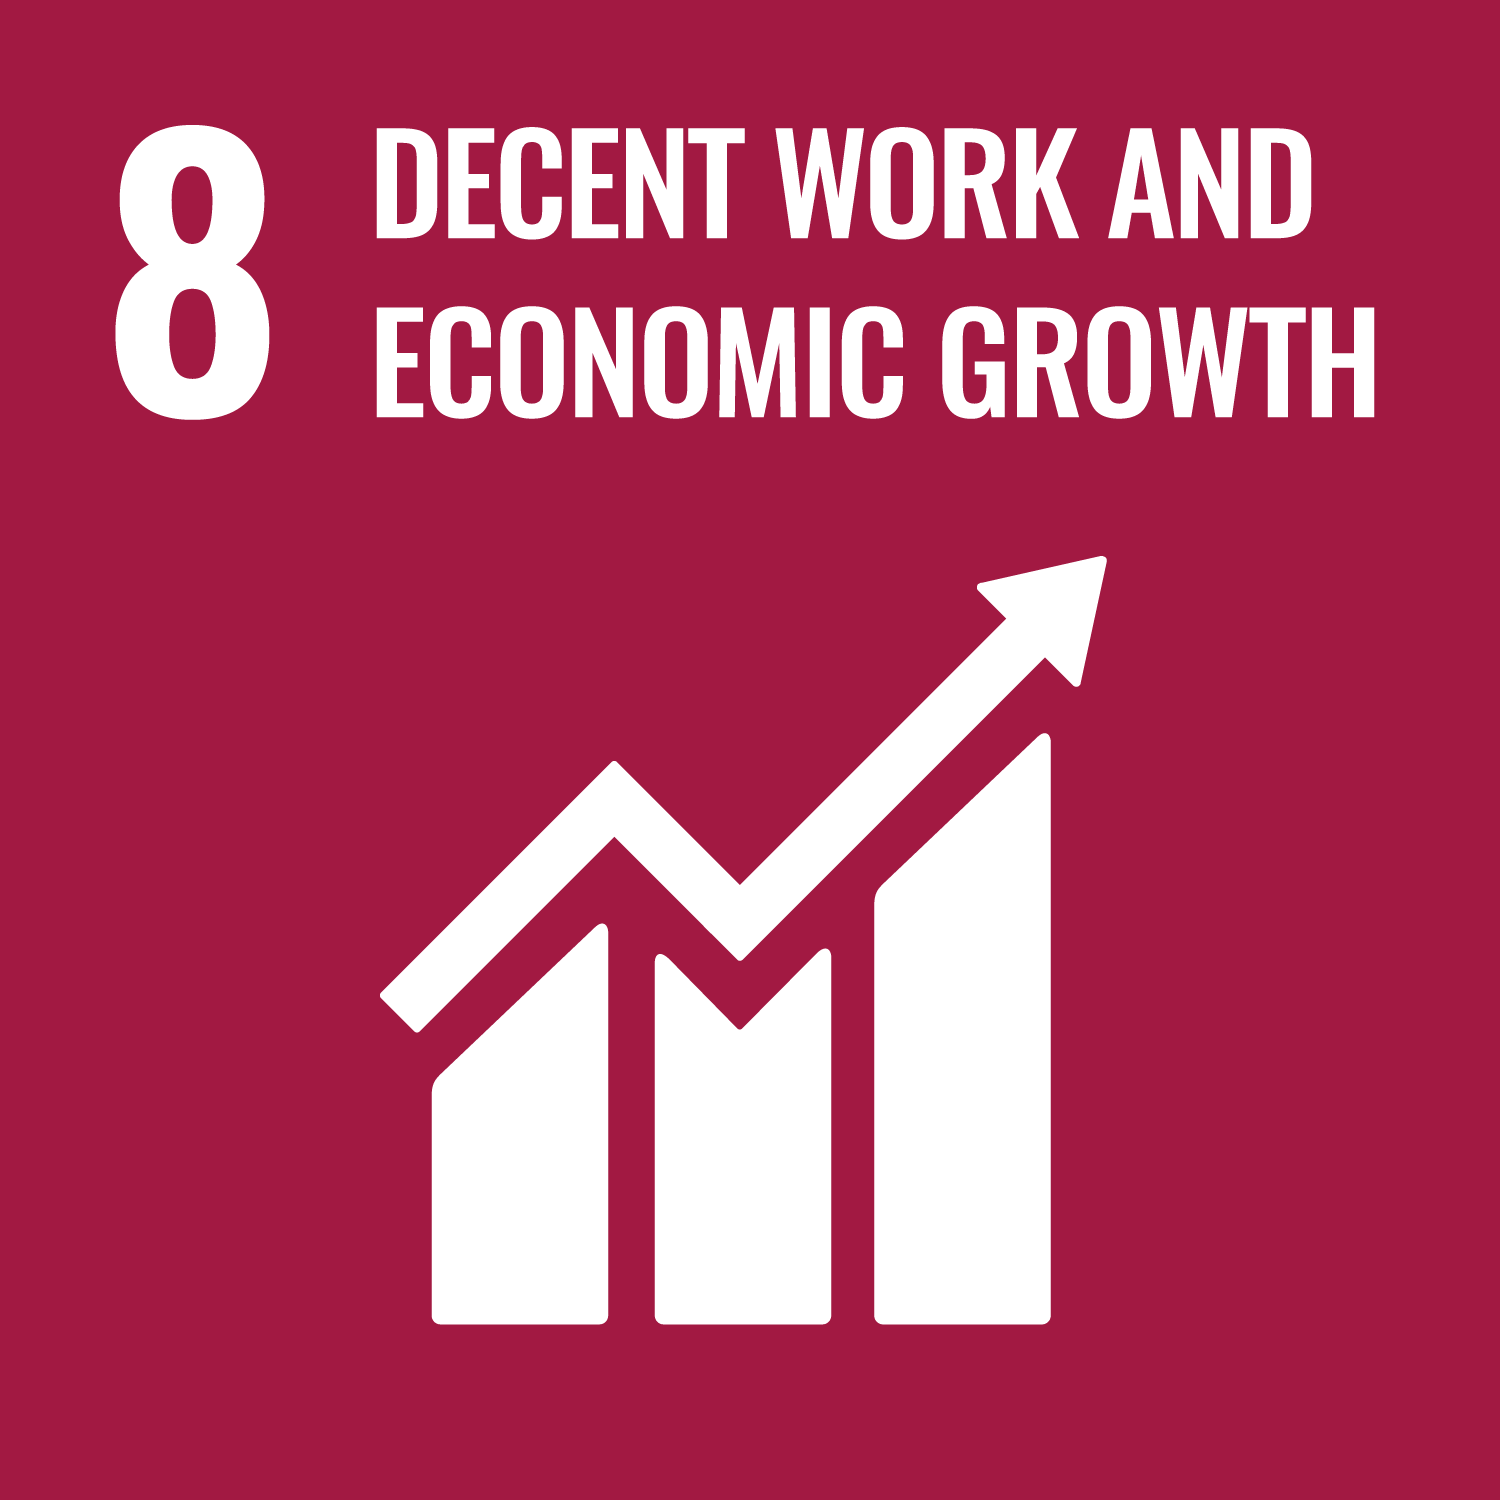 United Nation's 17 Sustainable Development Goals: Goal Number 8: Decent Work and Economic Growth